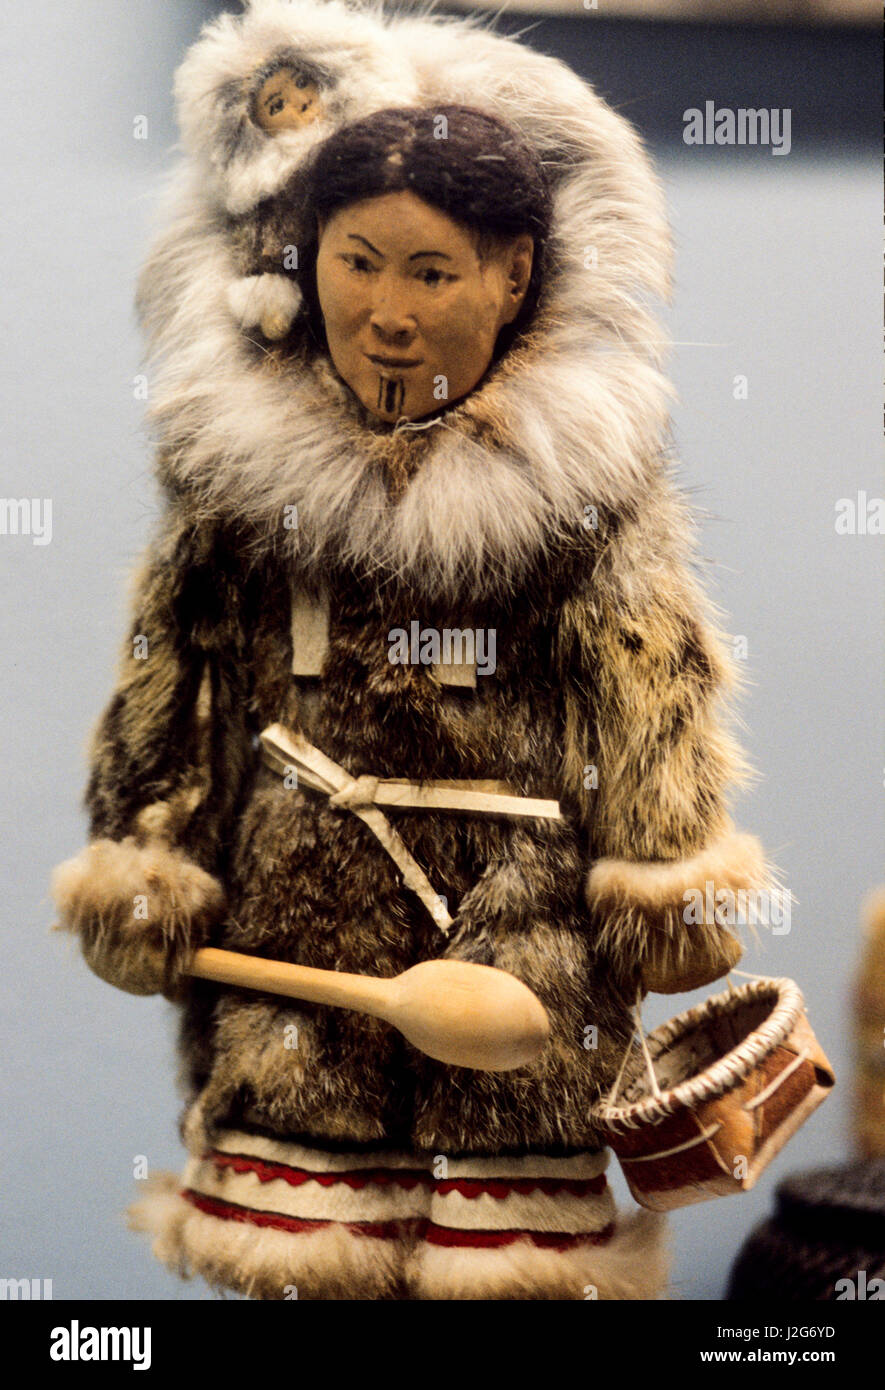 Native American artifact of an Athabaskan doll carved from wood dressed in traditional fur parka with a baby being carried inside the hood Stock Photo